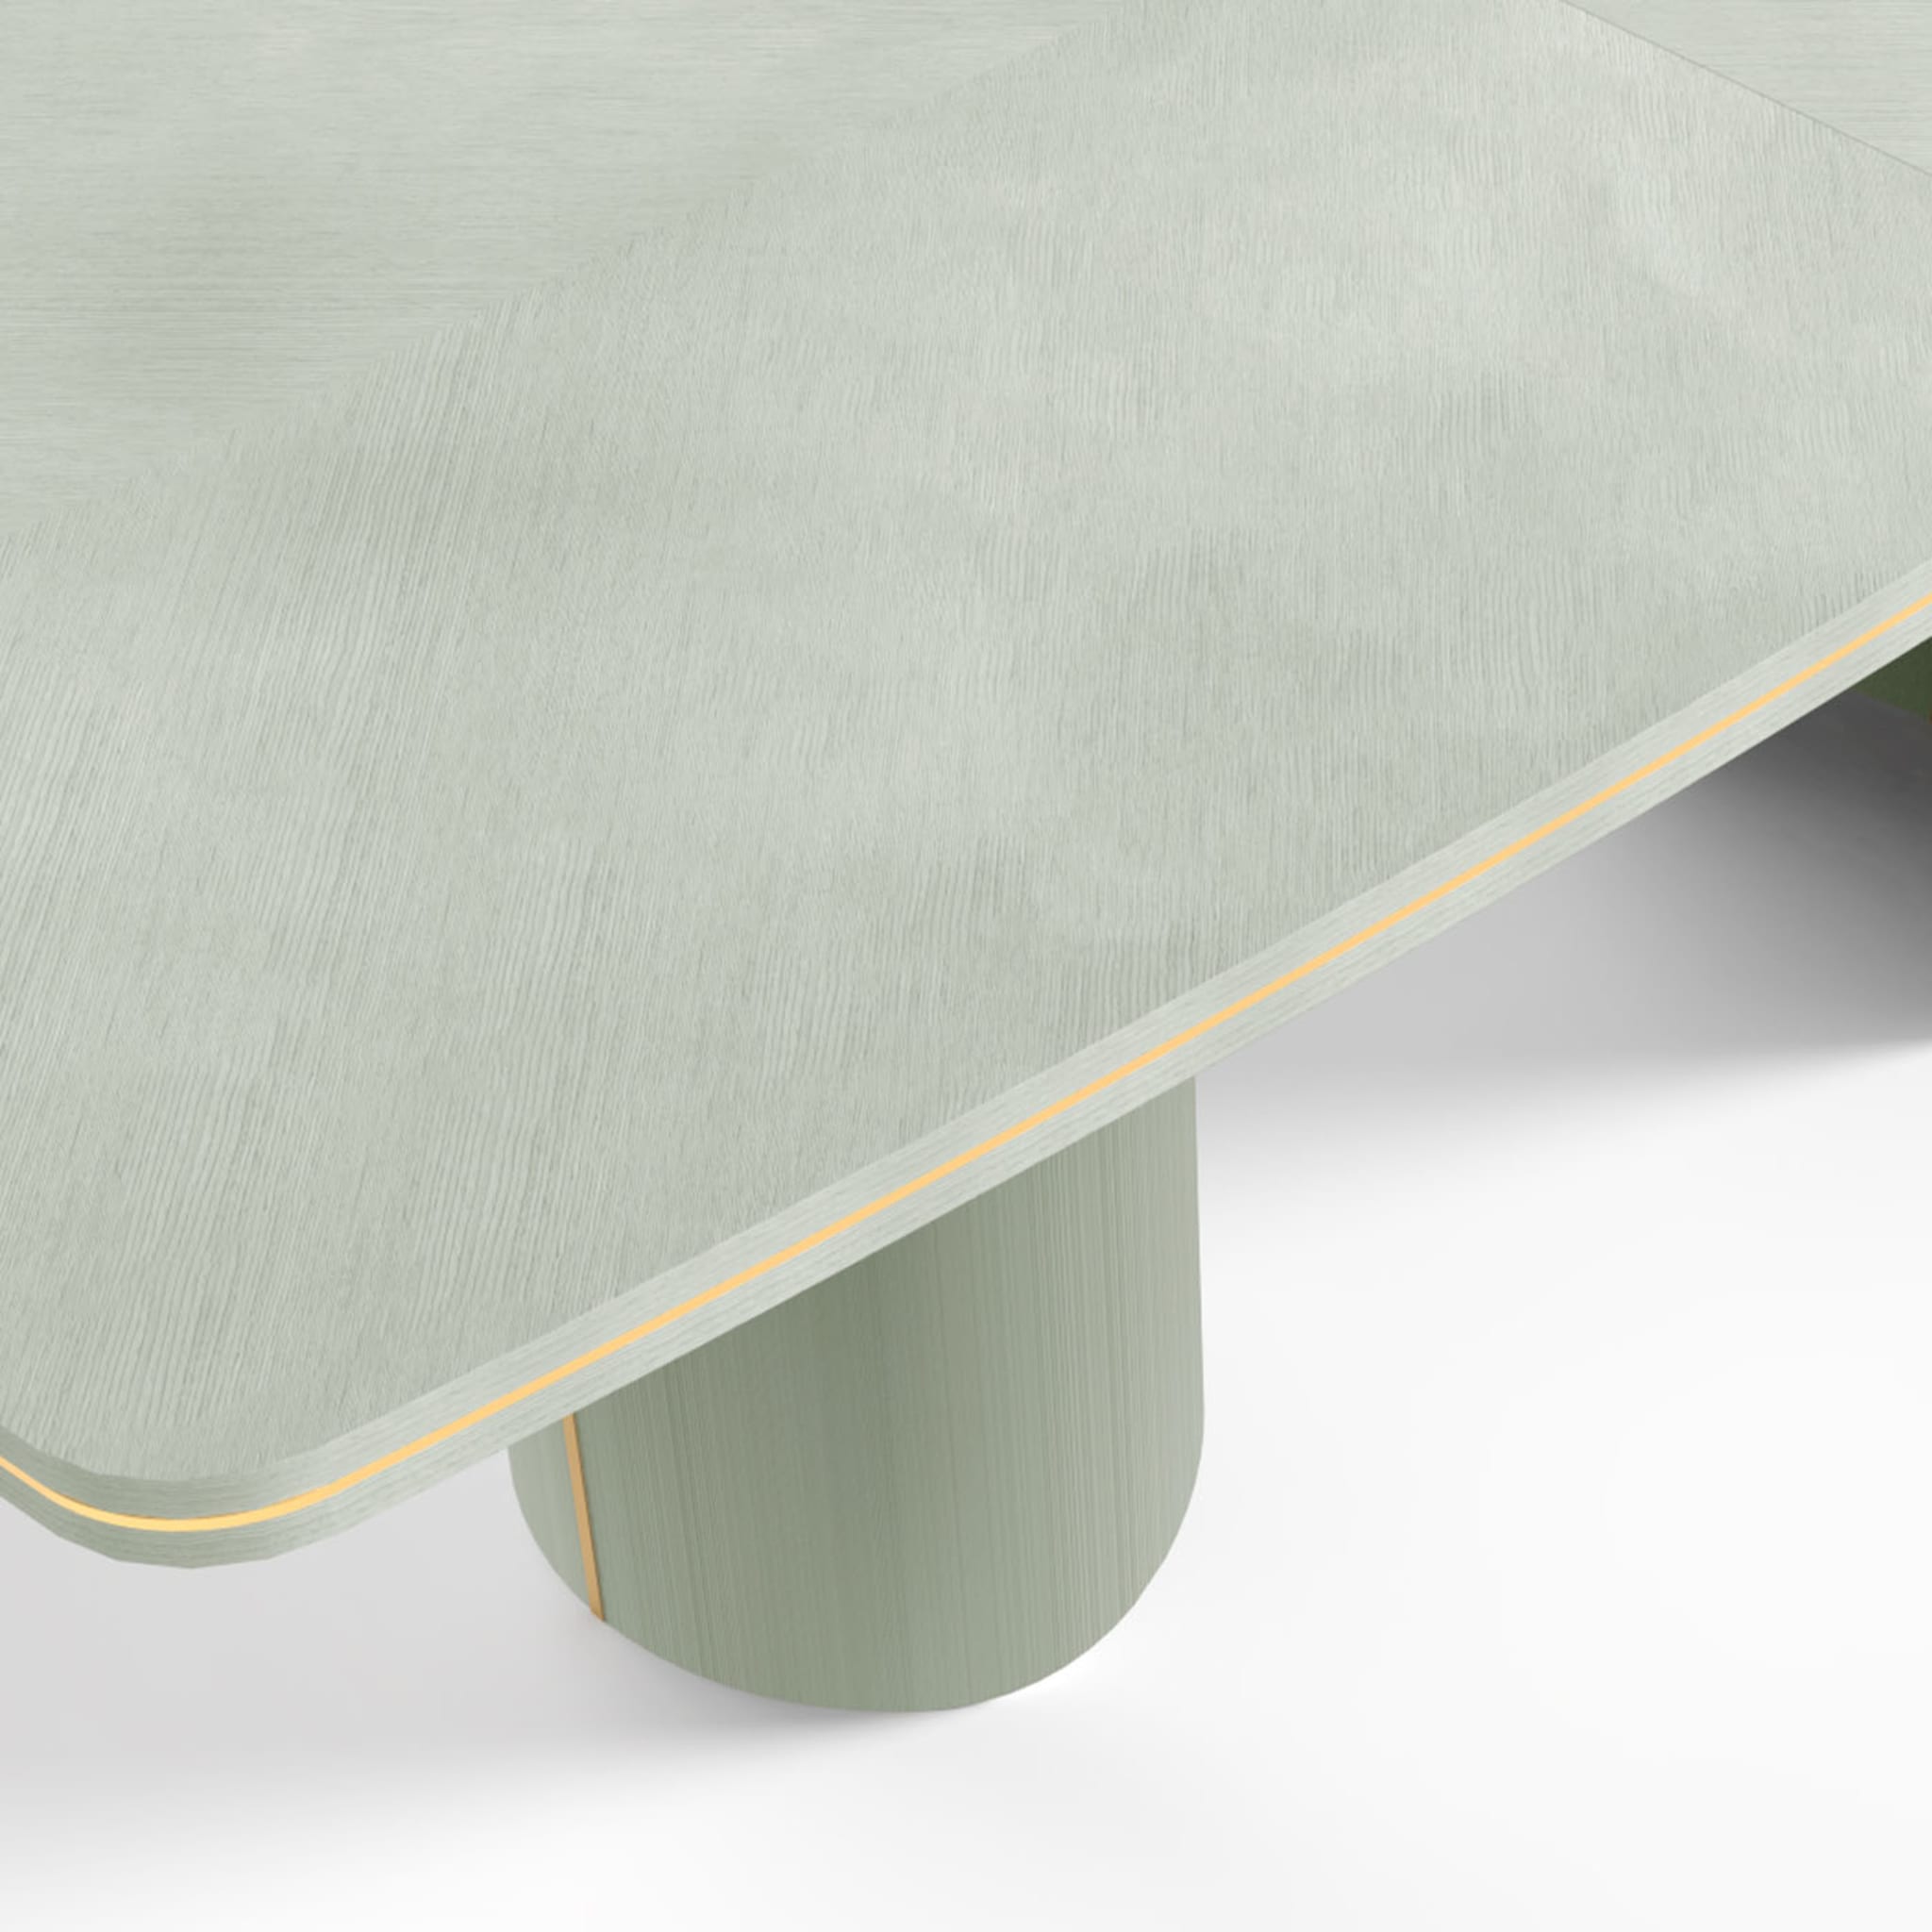 Edo Extendable Sage-Green Dining Table  - Alternative view 3